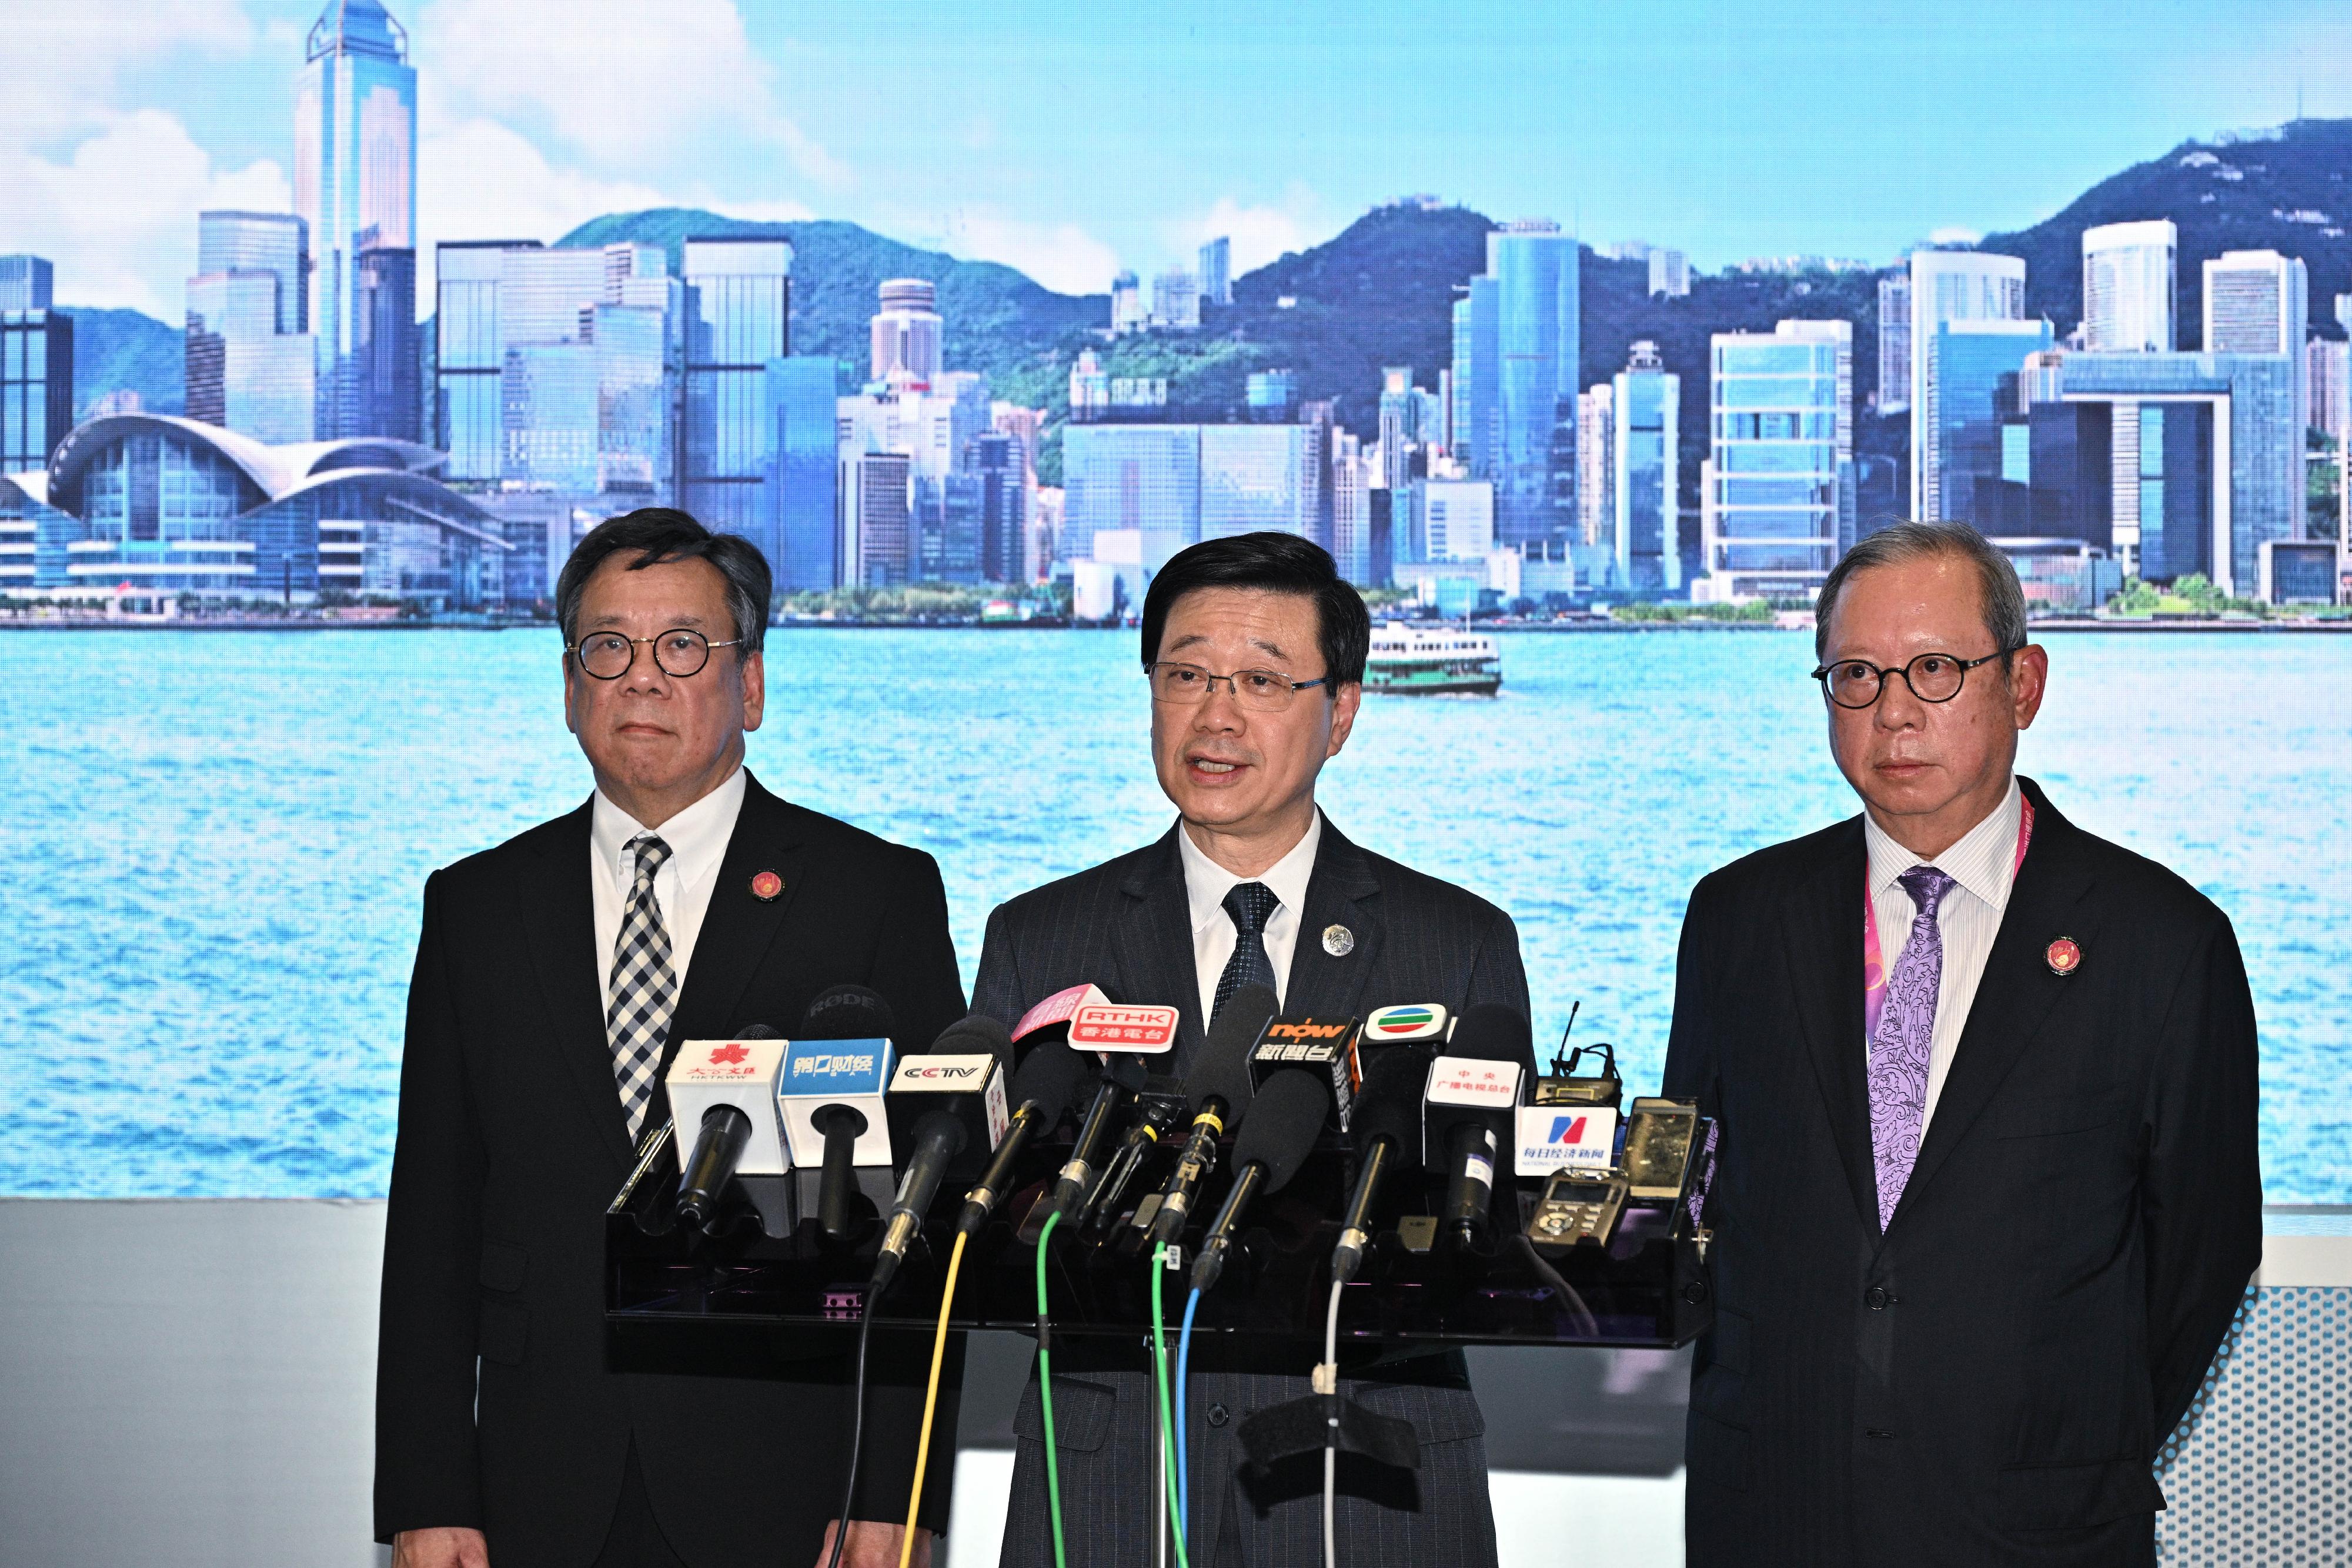 The Chief Executive, Mr John Lee (centre), with the Secretary for Commerce and Economic Development, Mr Algernon Yau (left), and the Chairman of the Hong Kong Trade Development Council, Dr Peter Lam (right), meet the media in Shanghai to conclude the visit today (November 5).